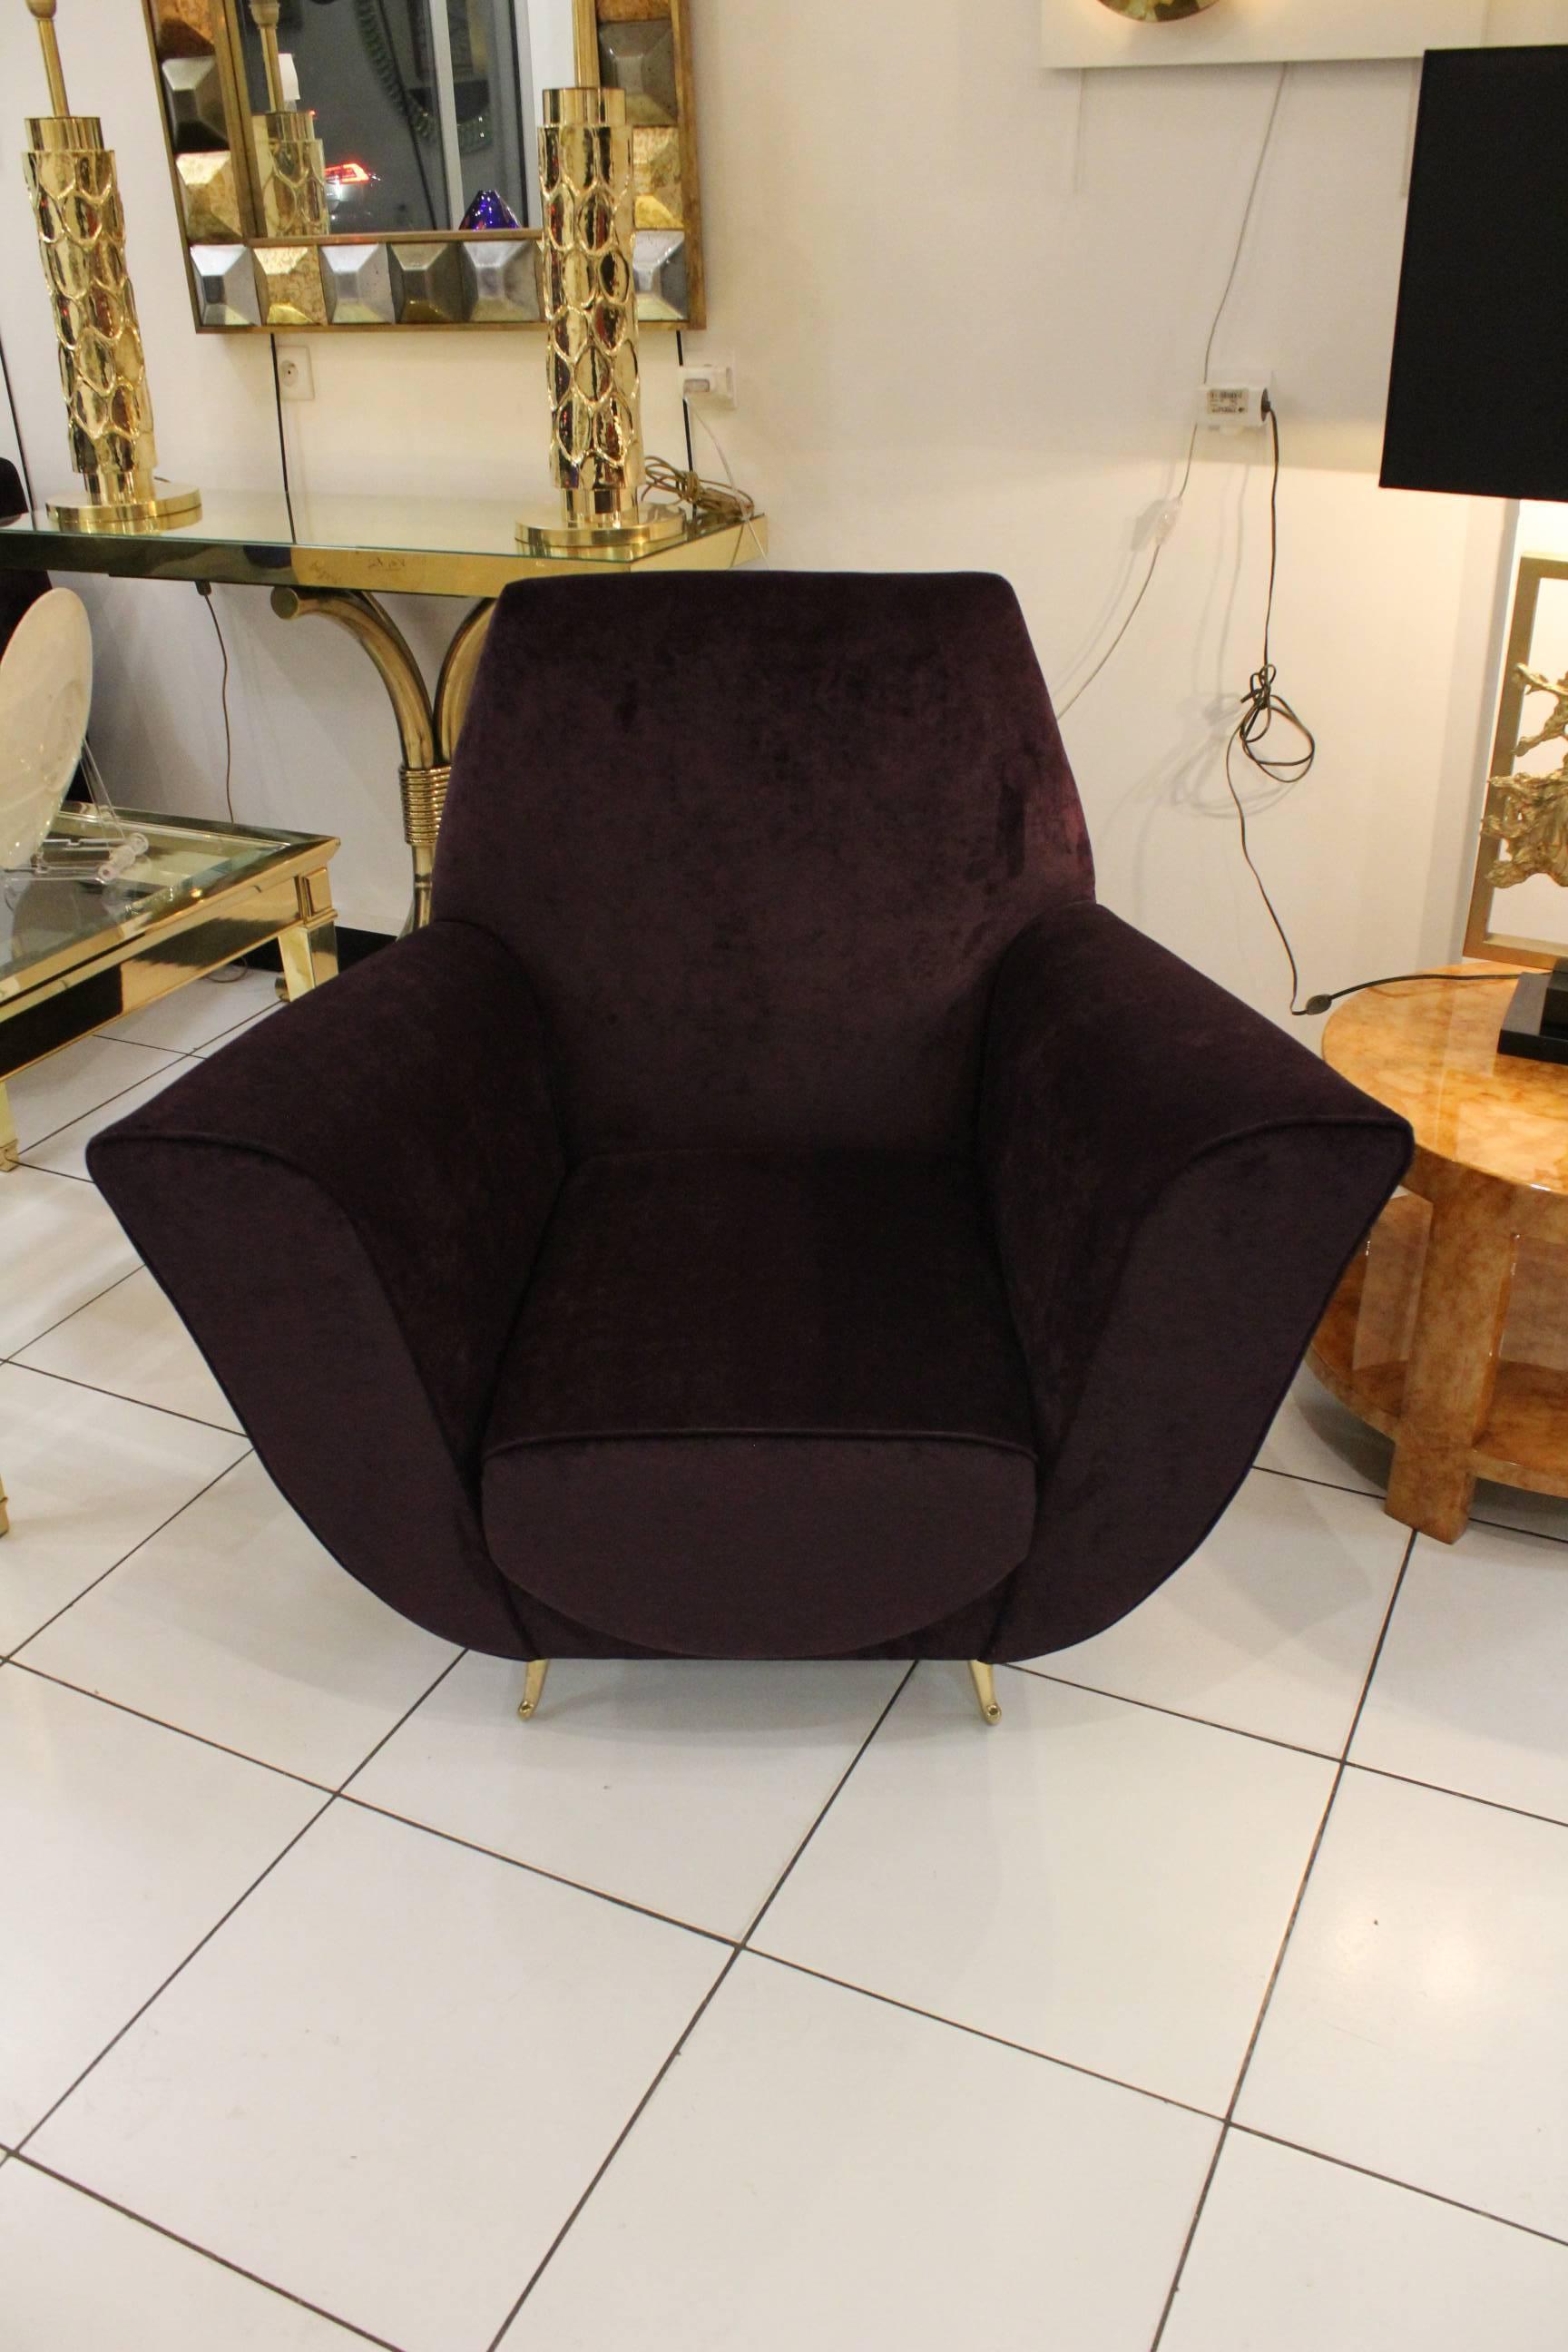 Italian armchairs reupholstered purple velvet in excellent condition.